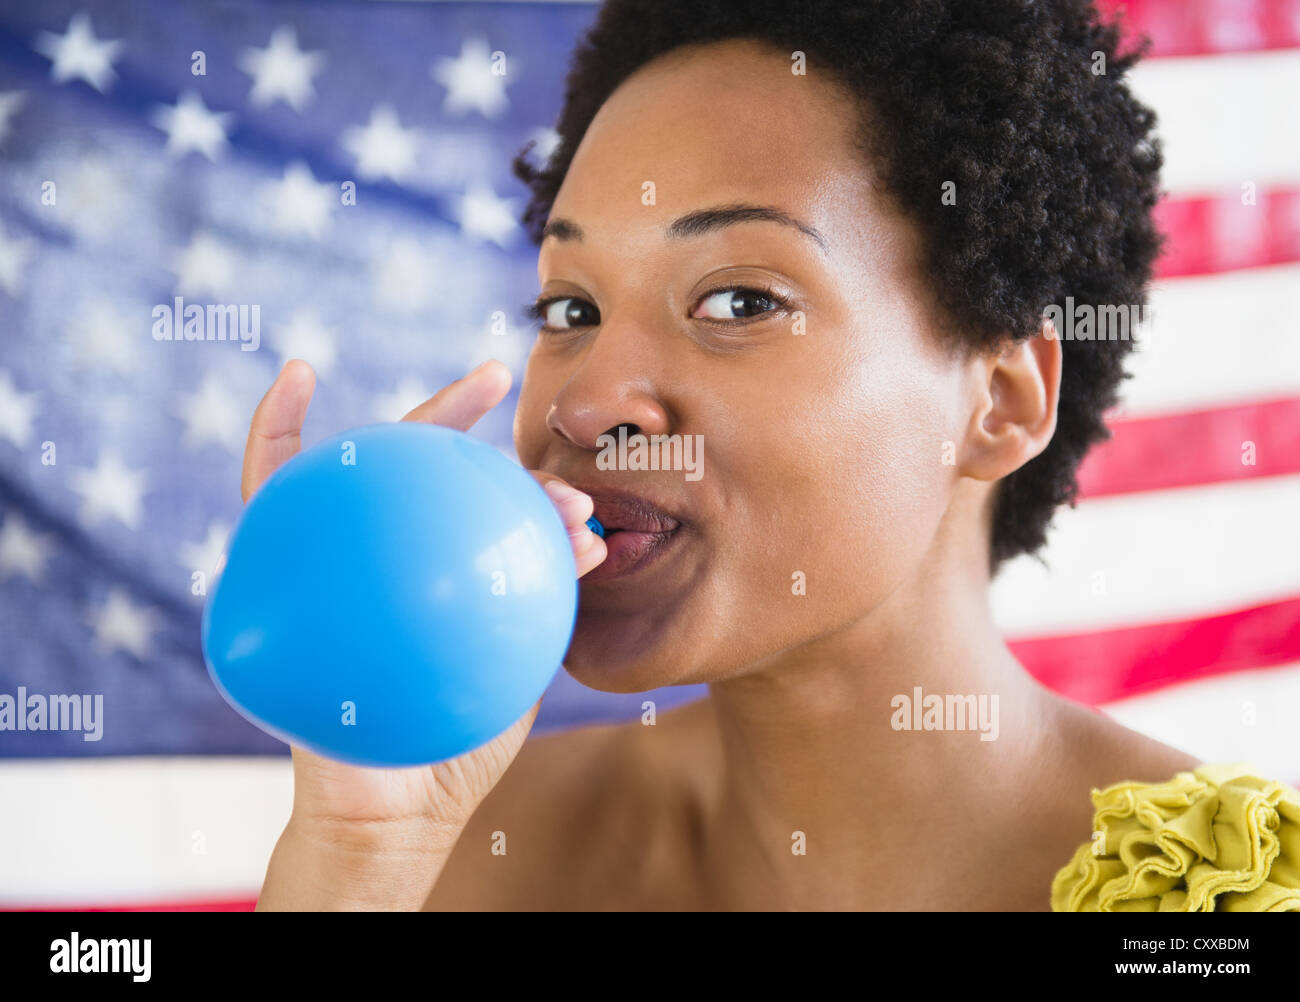 African American woman blowing up blue balloon Stock Photo